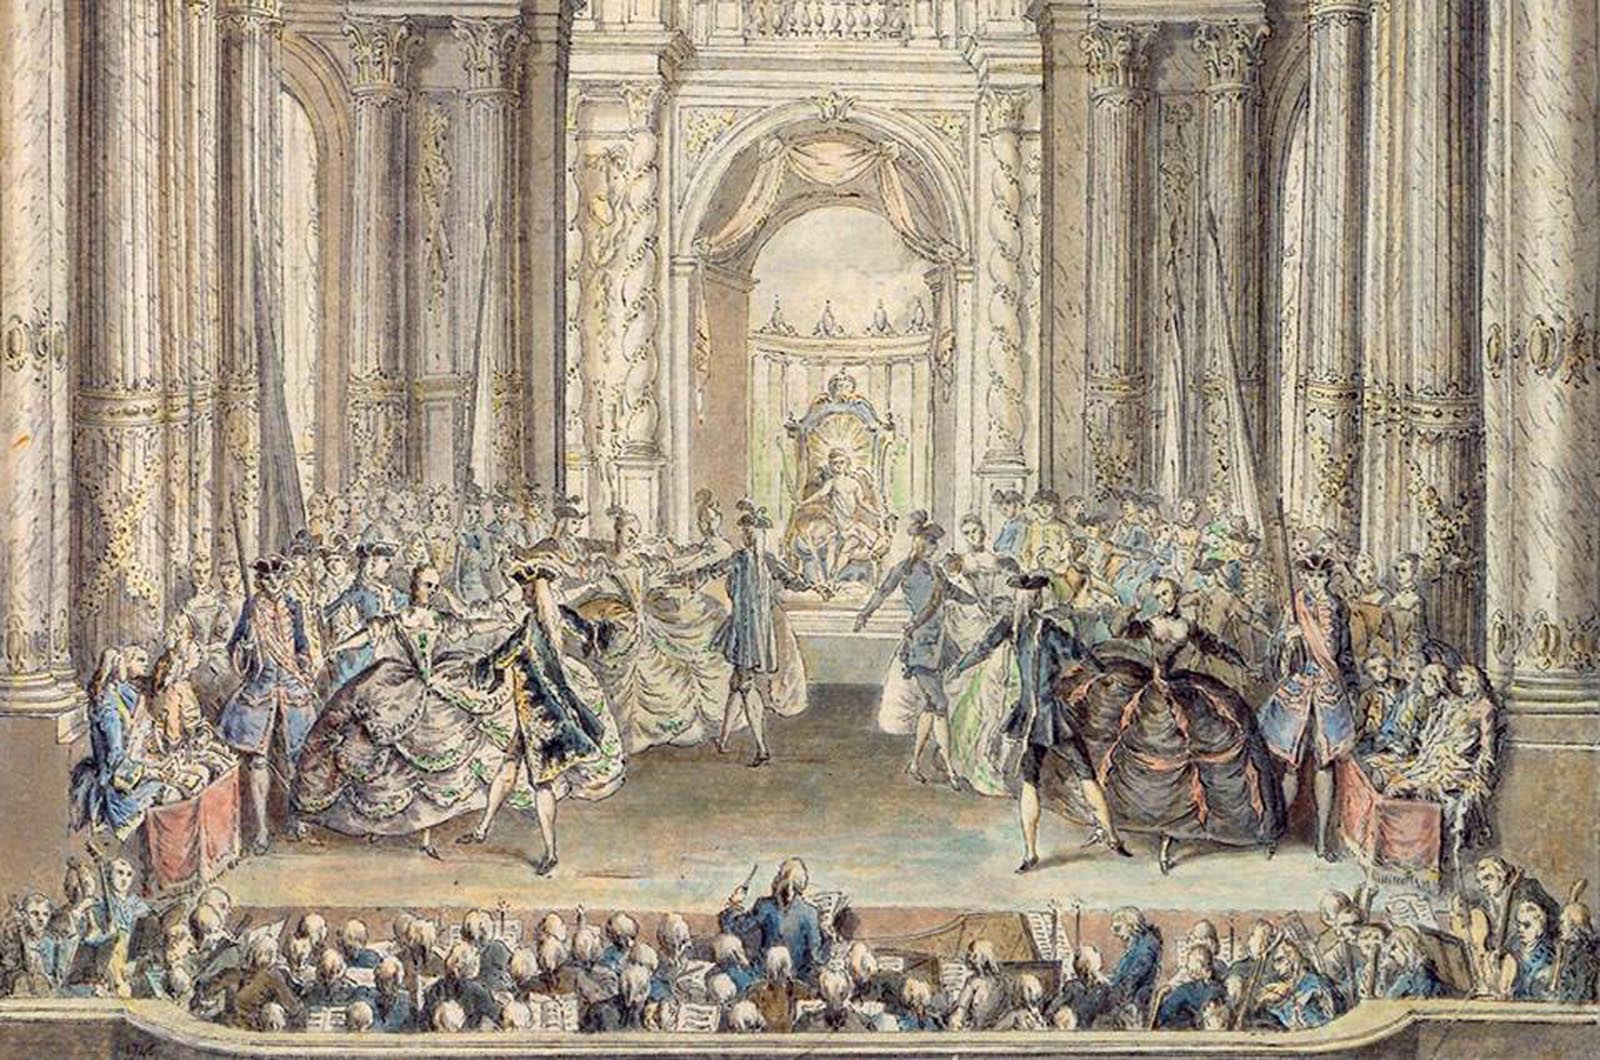 History of Ballet - French Influence and the Court of Louis XIV (17th Century)